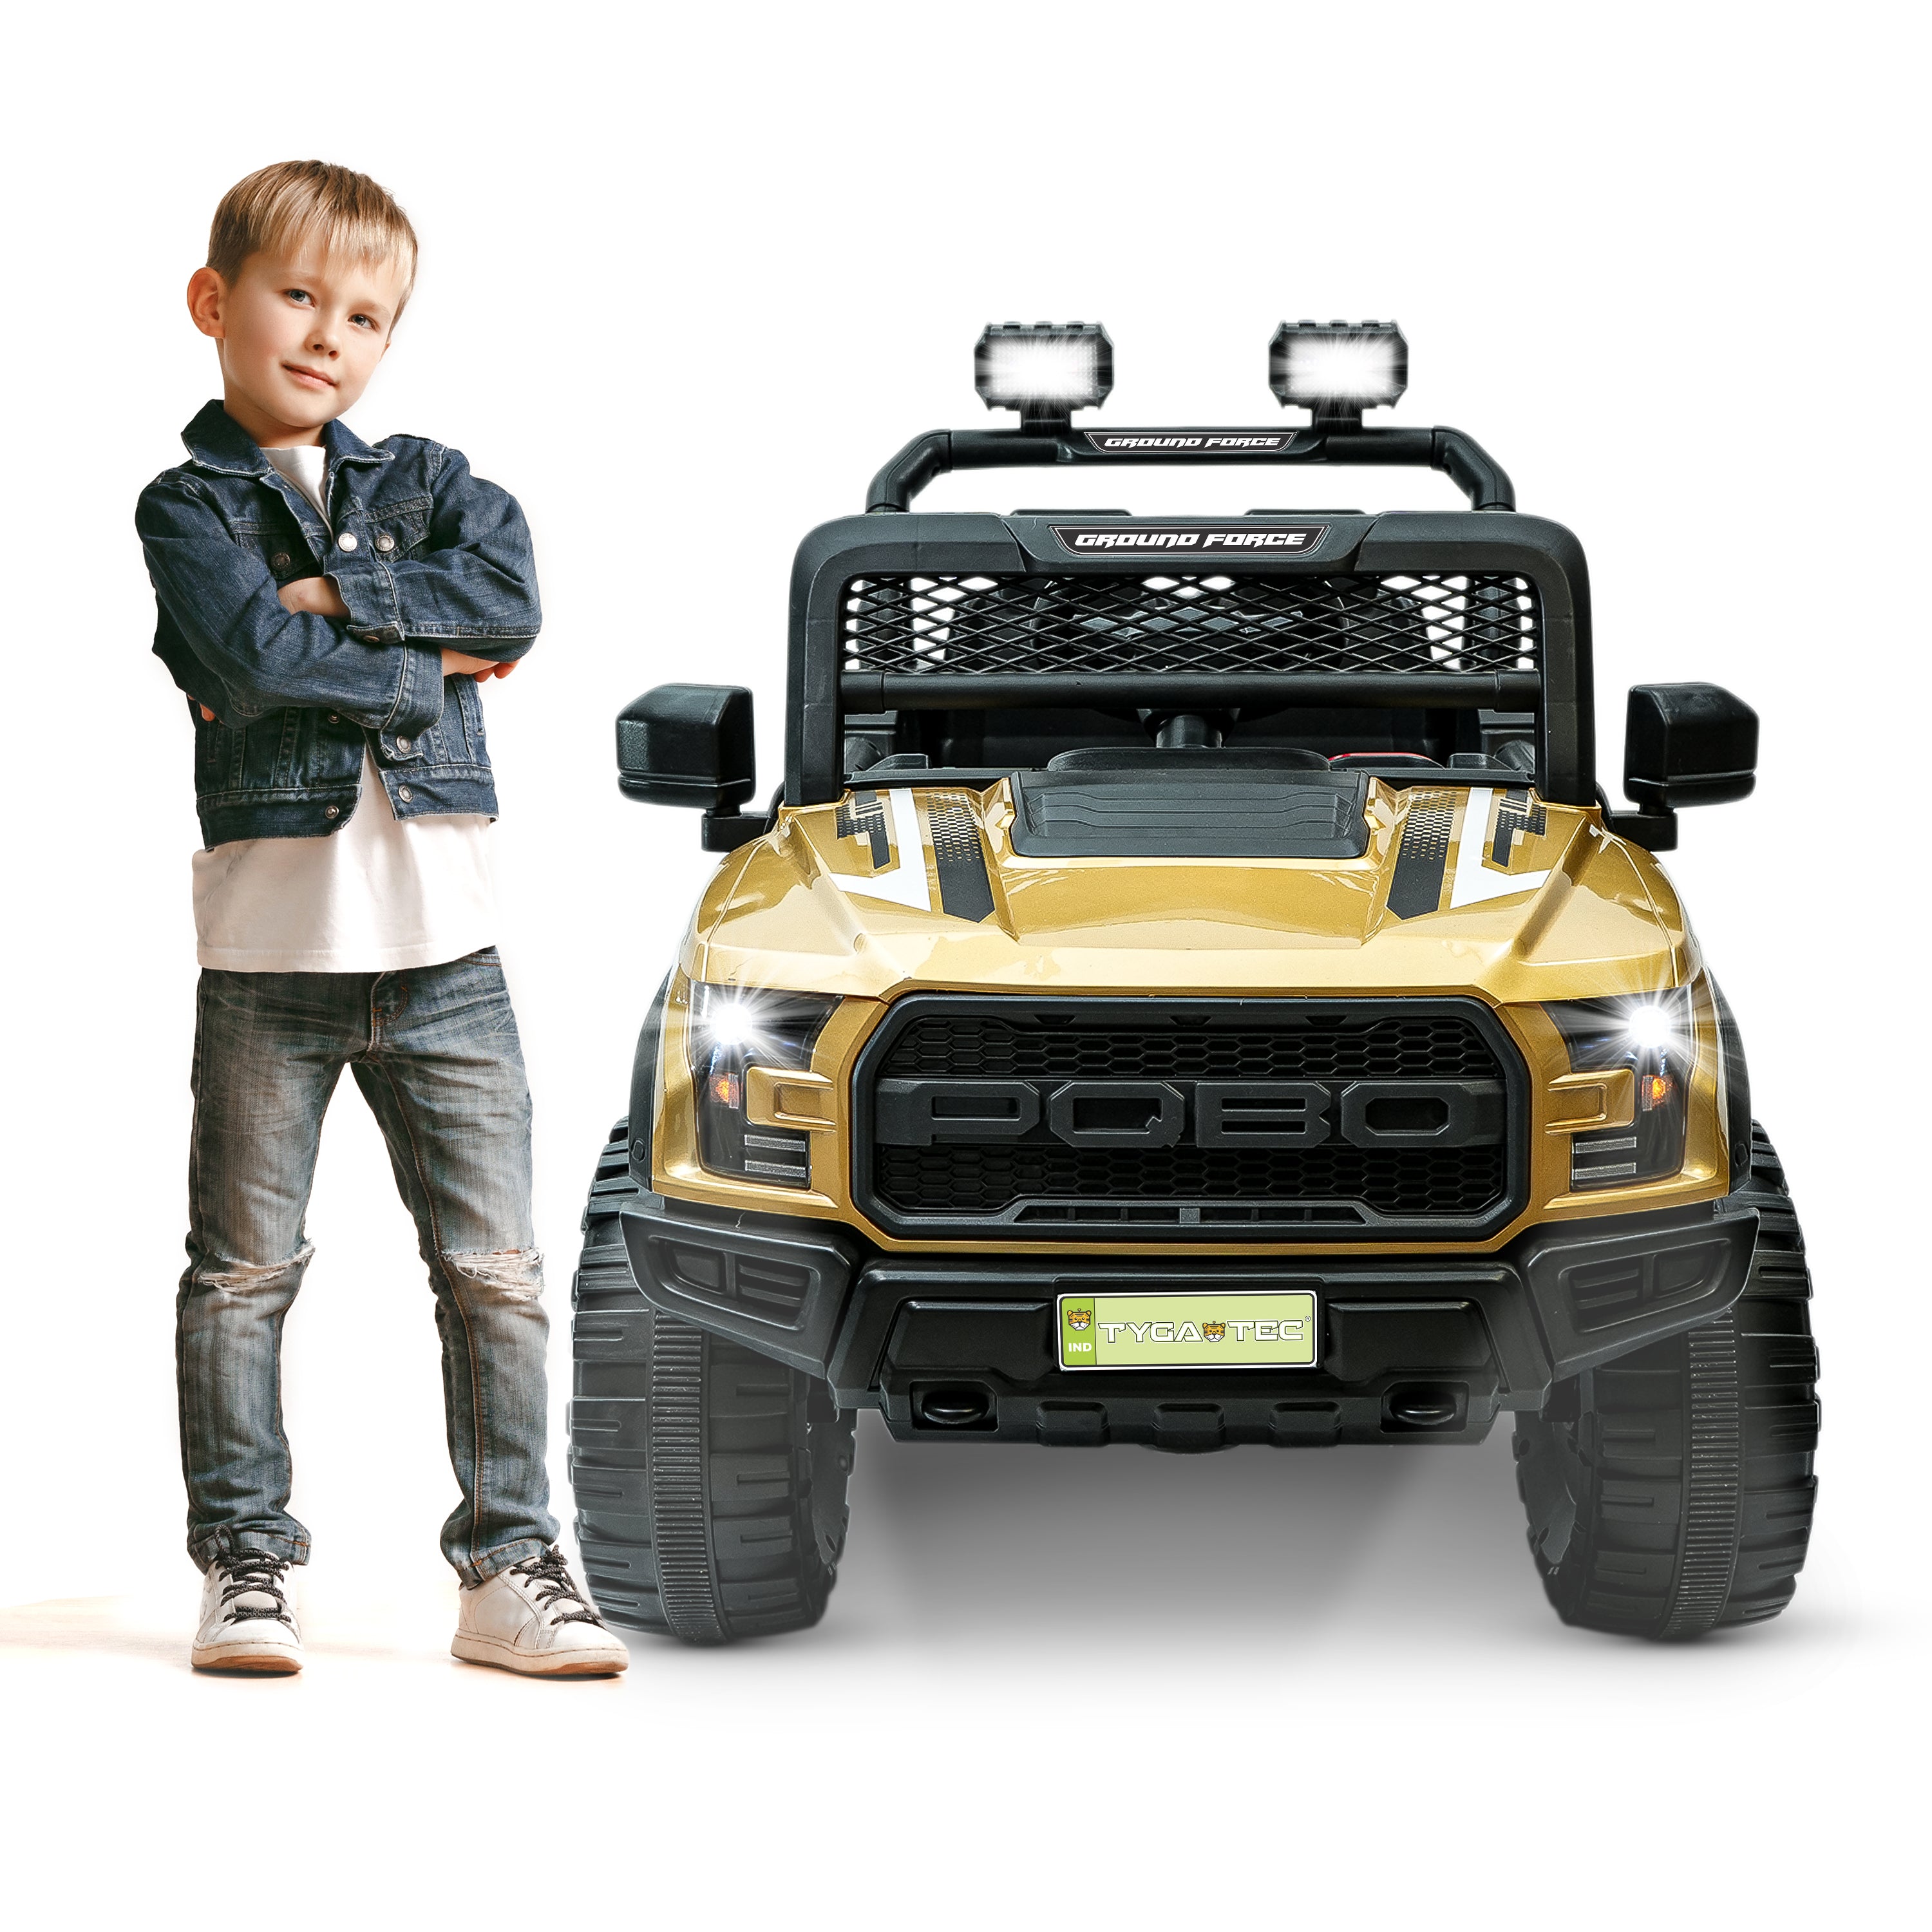 Tygatec Ride-on Kids Car Ground Force EXPLORER (GOLD COLOUR)